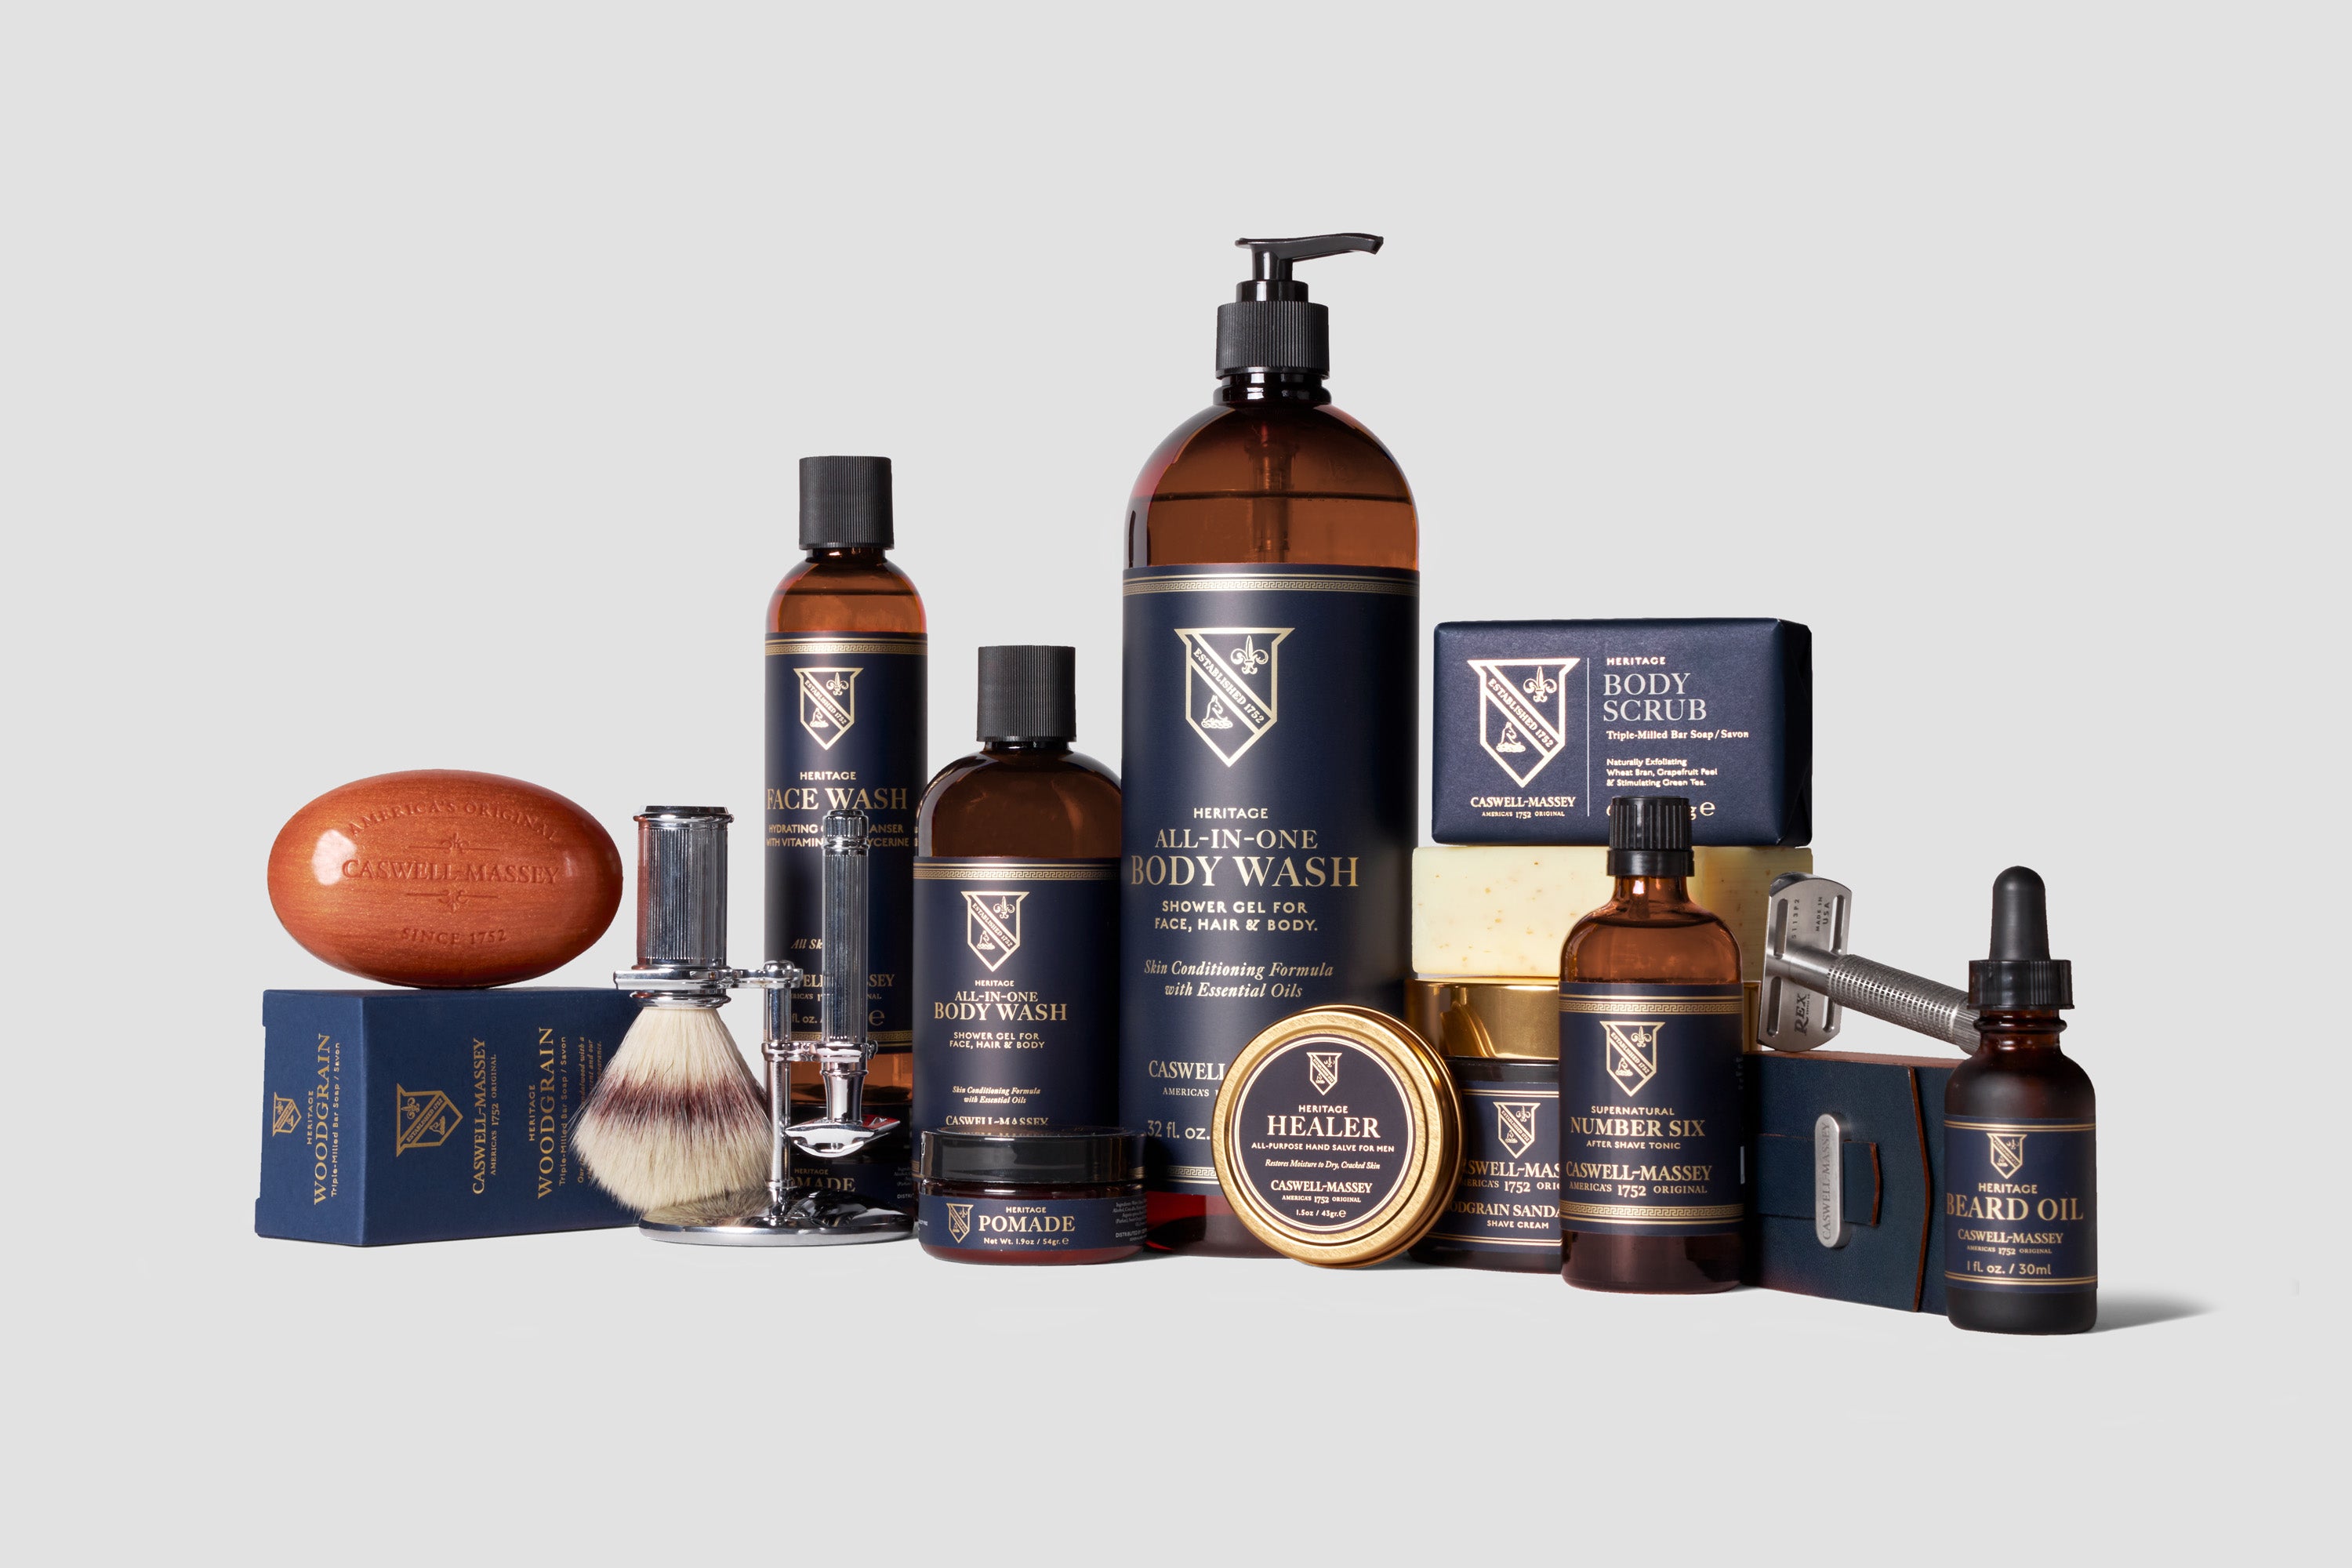 Caswell-Massey Heritage Collection for Men: image shows assortment of men's grooming products including Chrome Shave Set, Woodgrain Sandalwood Bar Soap, Heritage All-in-One Body Wash, Heritage Face Wash, Heritage Face & Beard Oil, Heritage Healer Hand Salve, Heritage Body Scrub Bar Soap, Number Six Shave Cream, and Number Six Aftershave